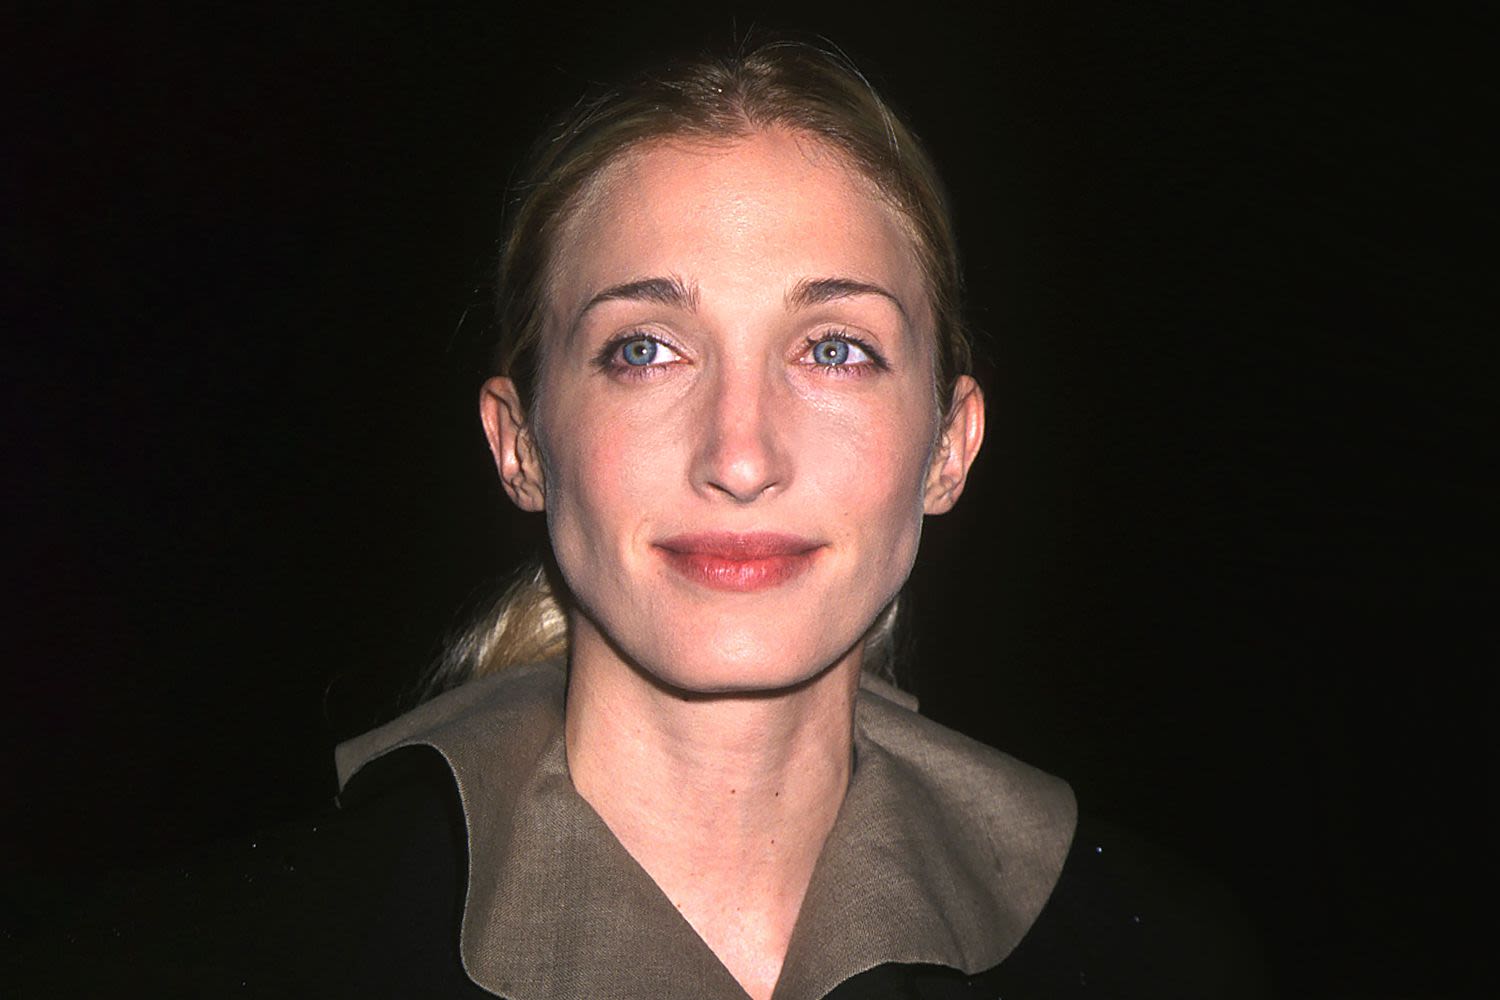 Carolyn Bessette-Kennedy’s Pals Remember Warm, Silly, Fun-Loving Friend Who Was the ‘Opposite of Buttoned Up’